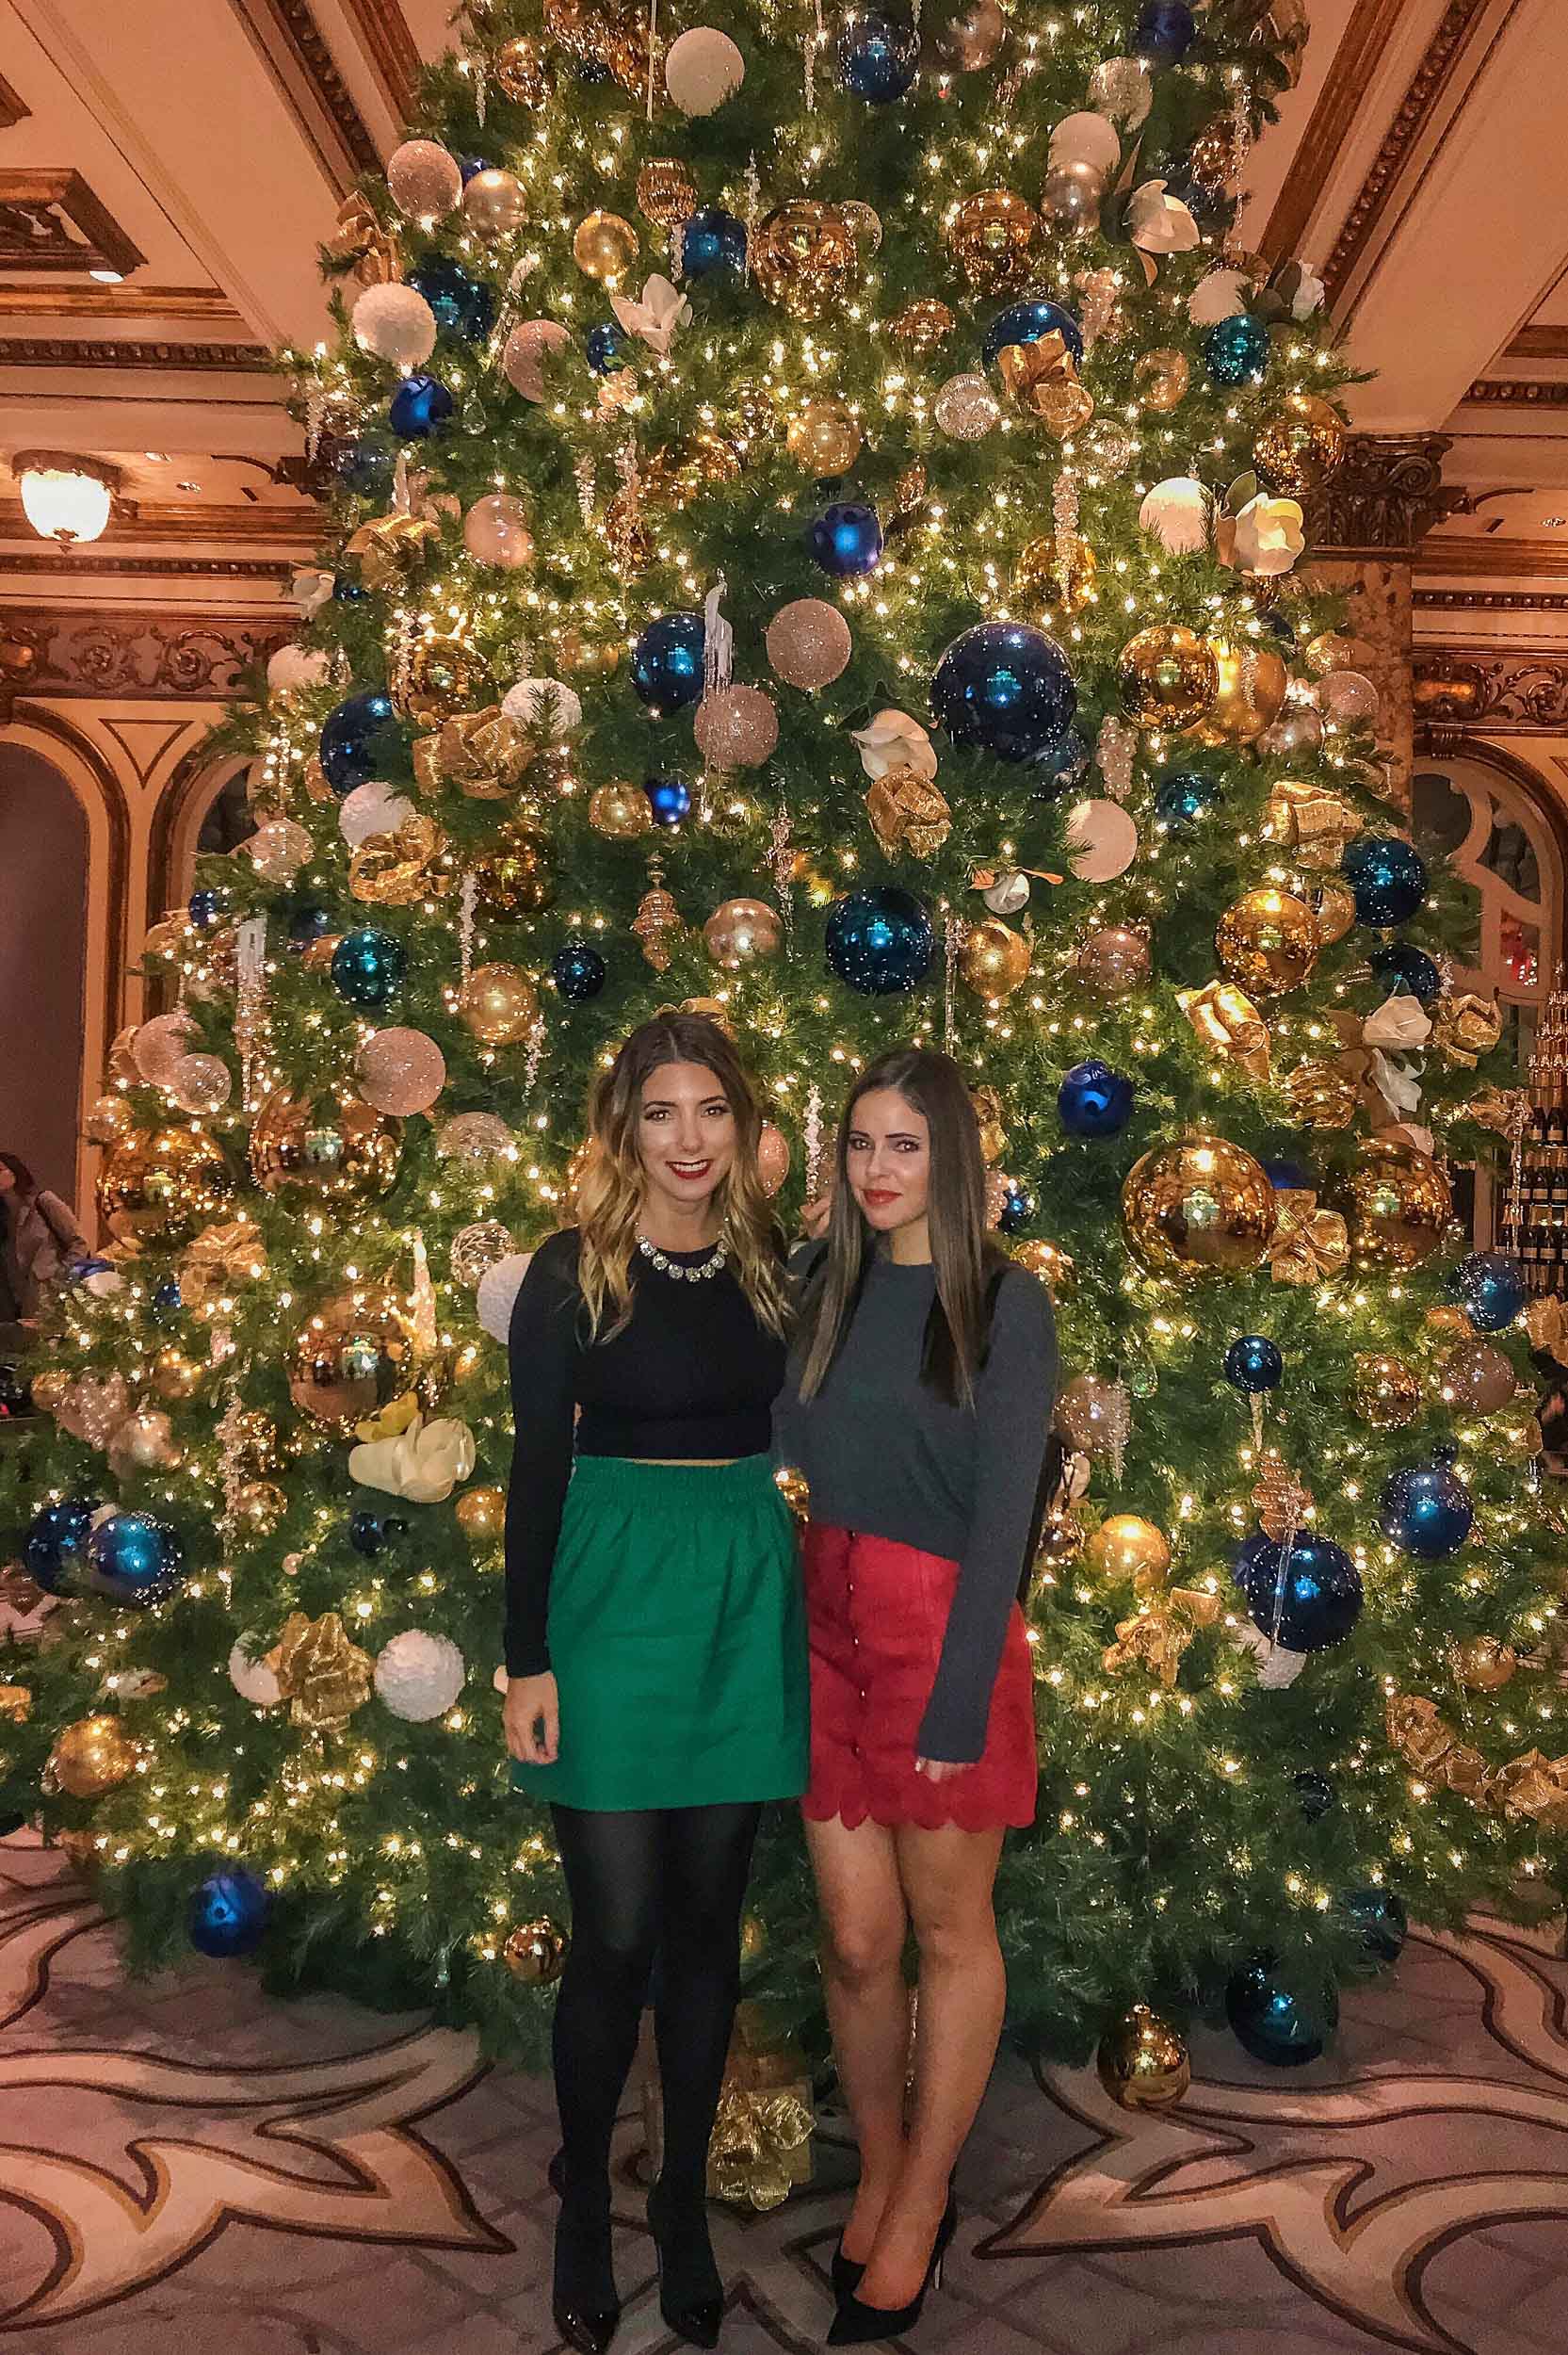 In front of the 23-foot tall Christmas tree at The Fairmont in SF after holiday gingerbread tea time